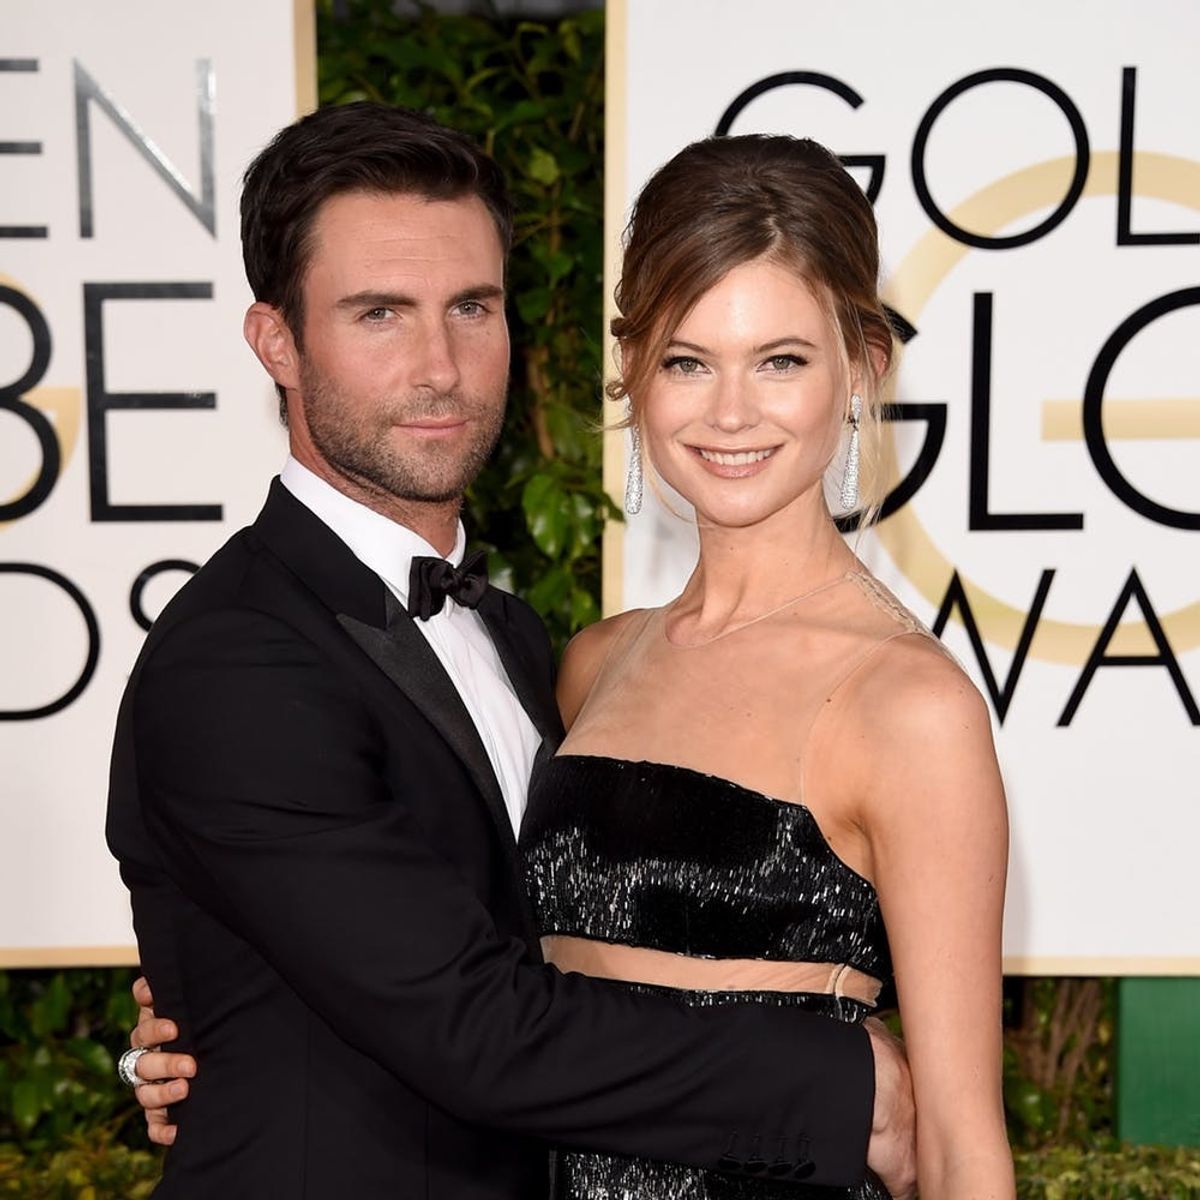 Behati Prinsloo Is Pregnant and Expecting Her Second Child With Adam Levine!